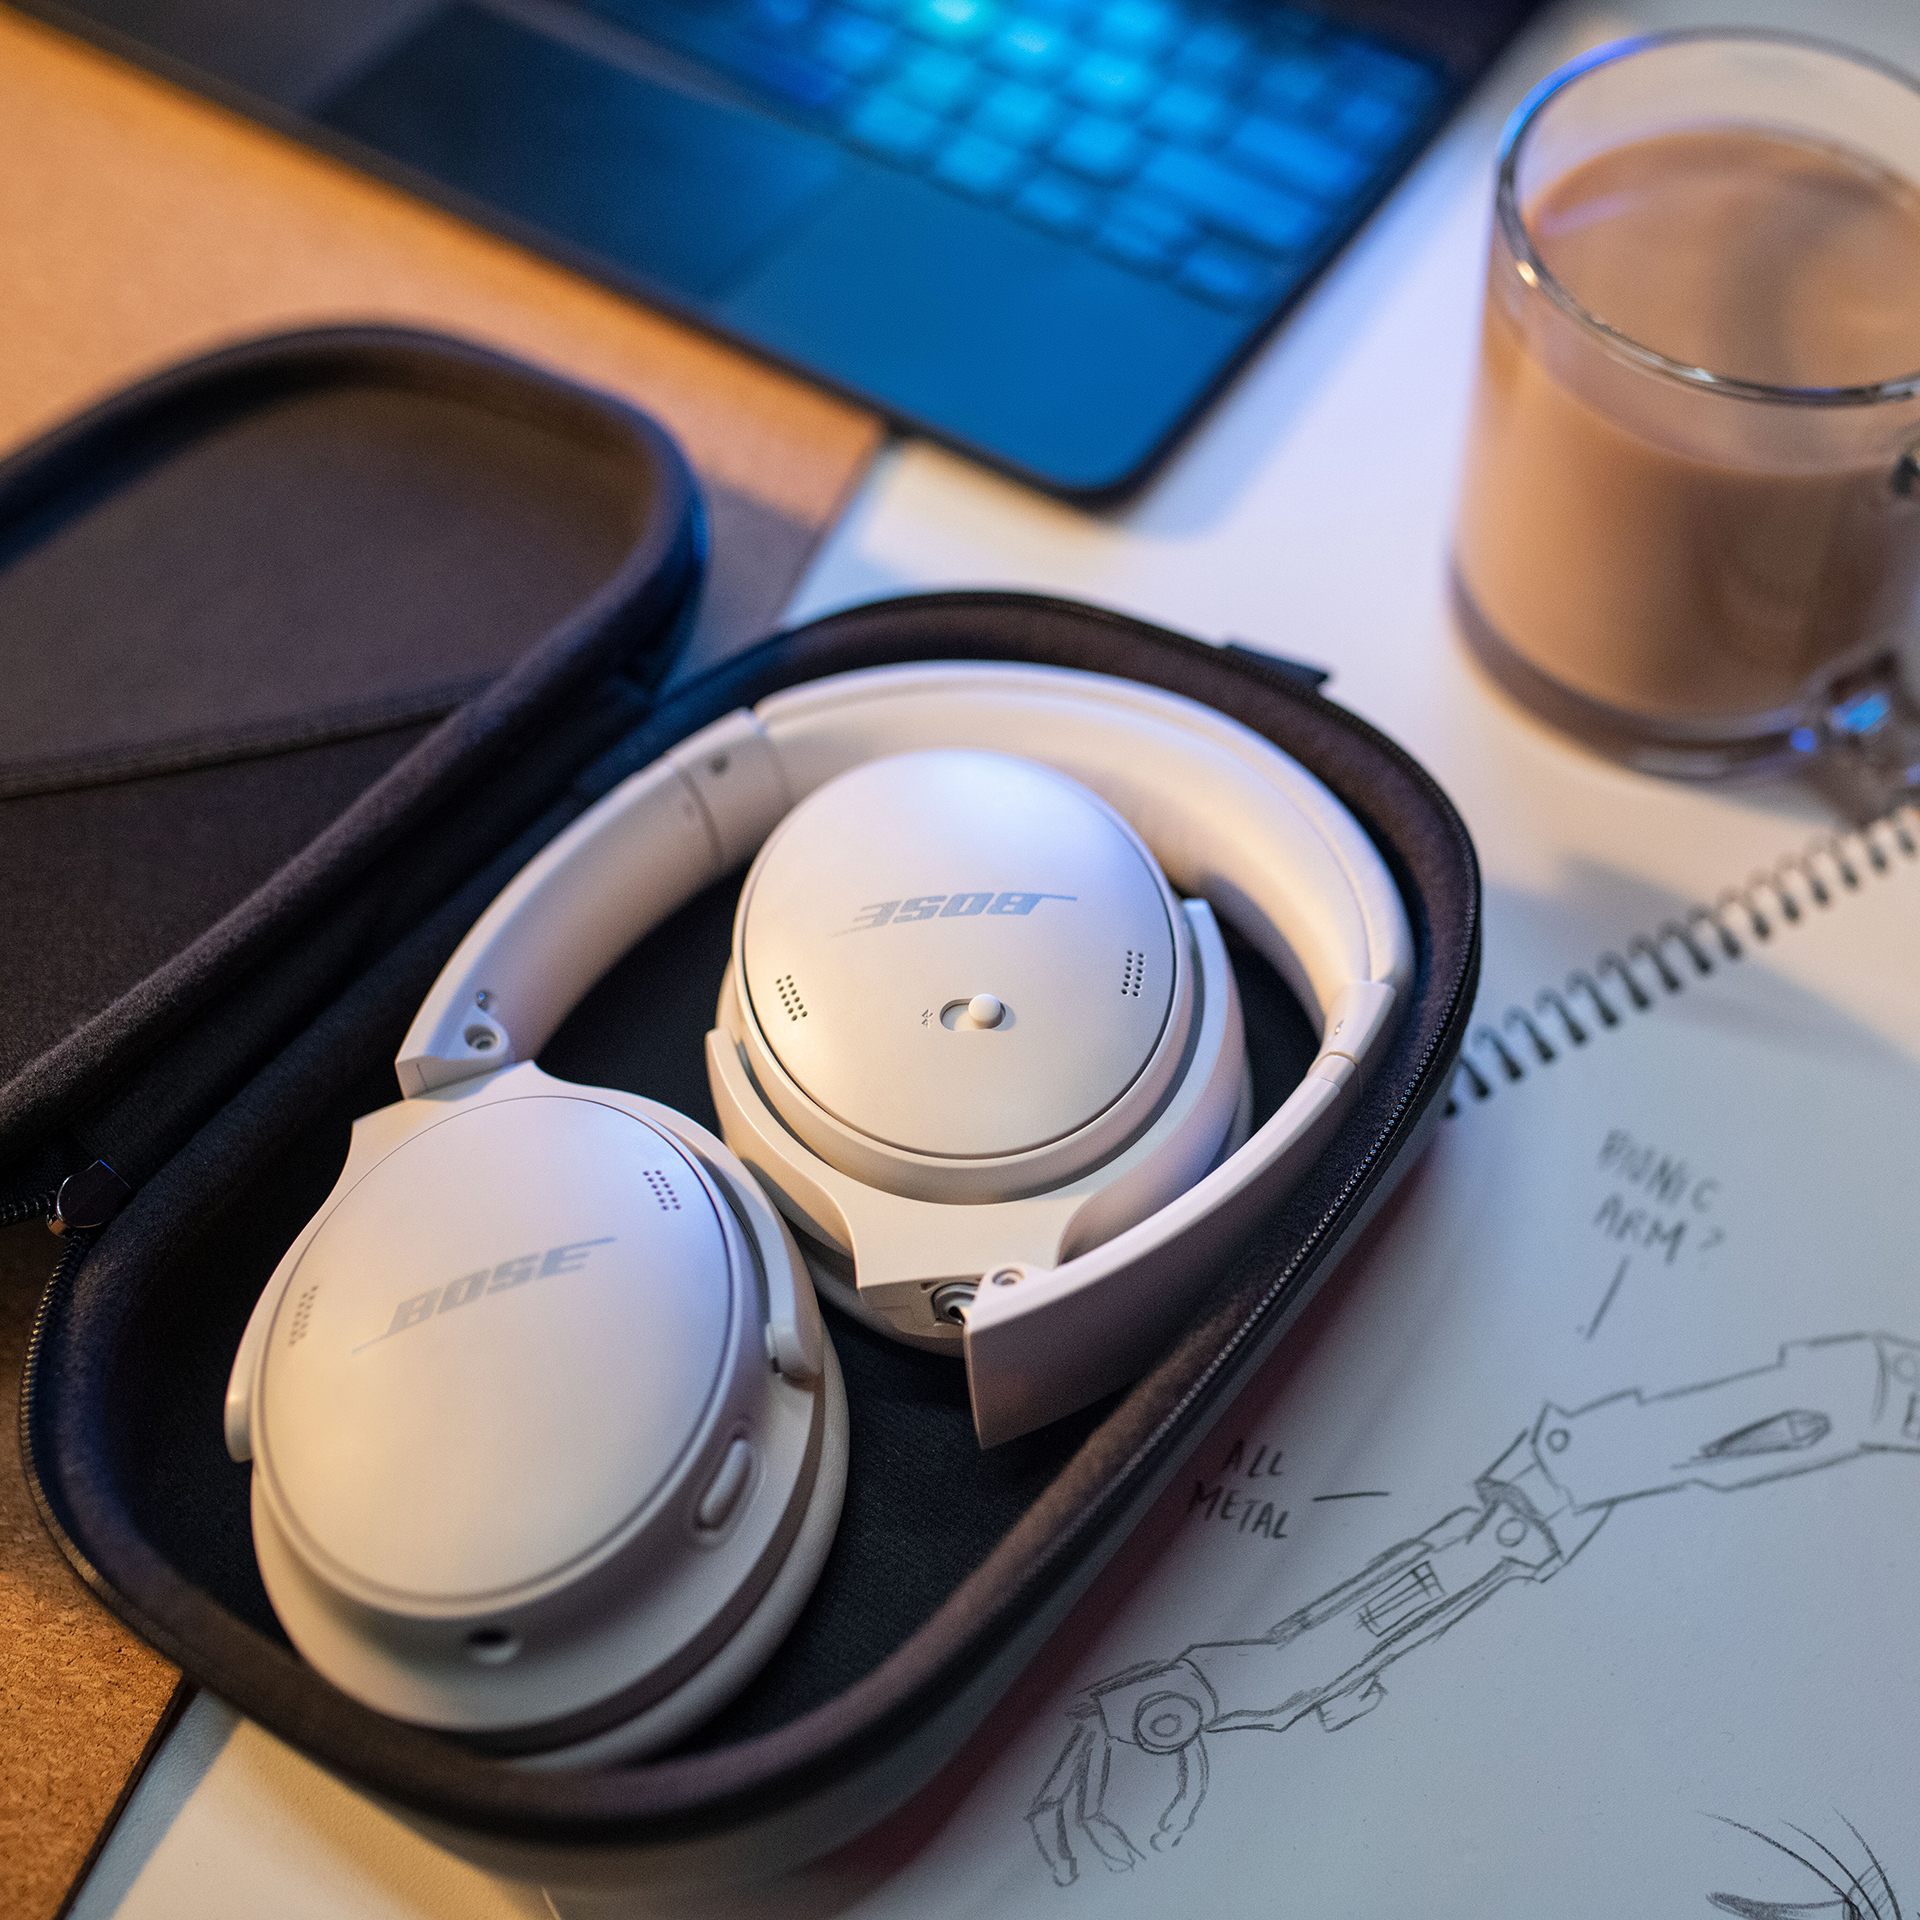 Bose launches its latest set of wireless noise-canceling